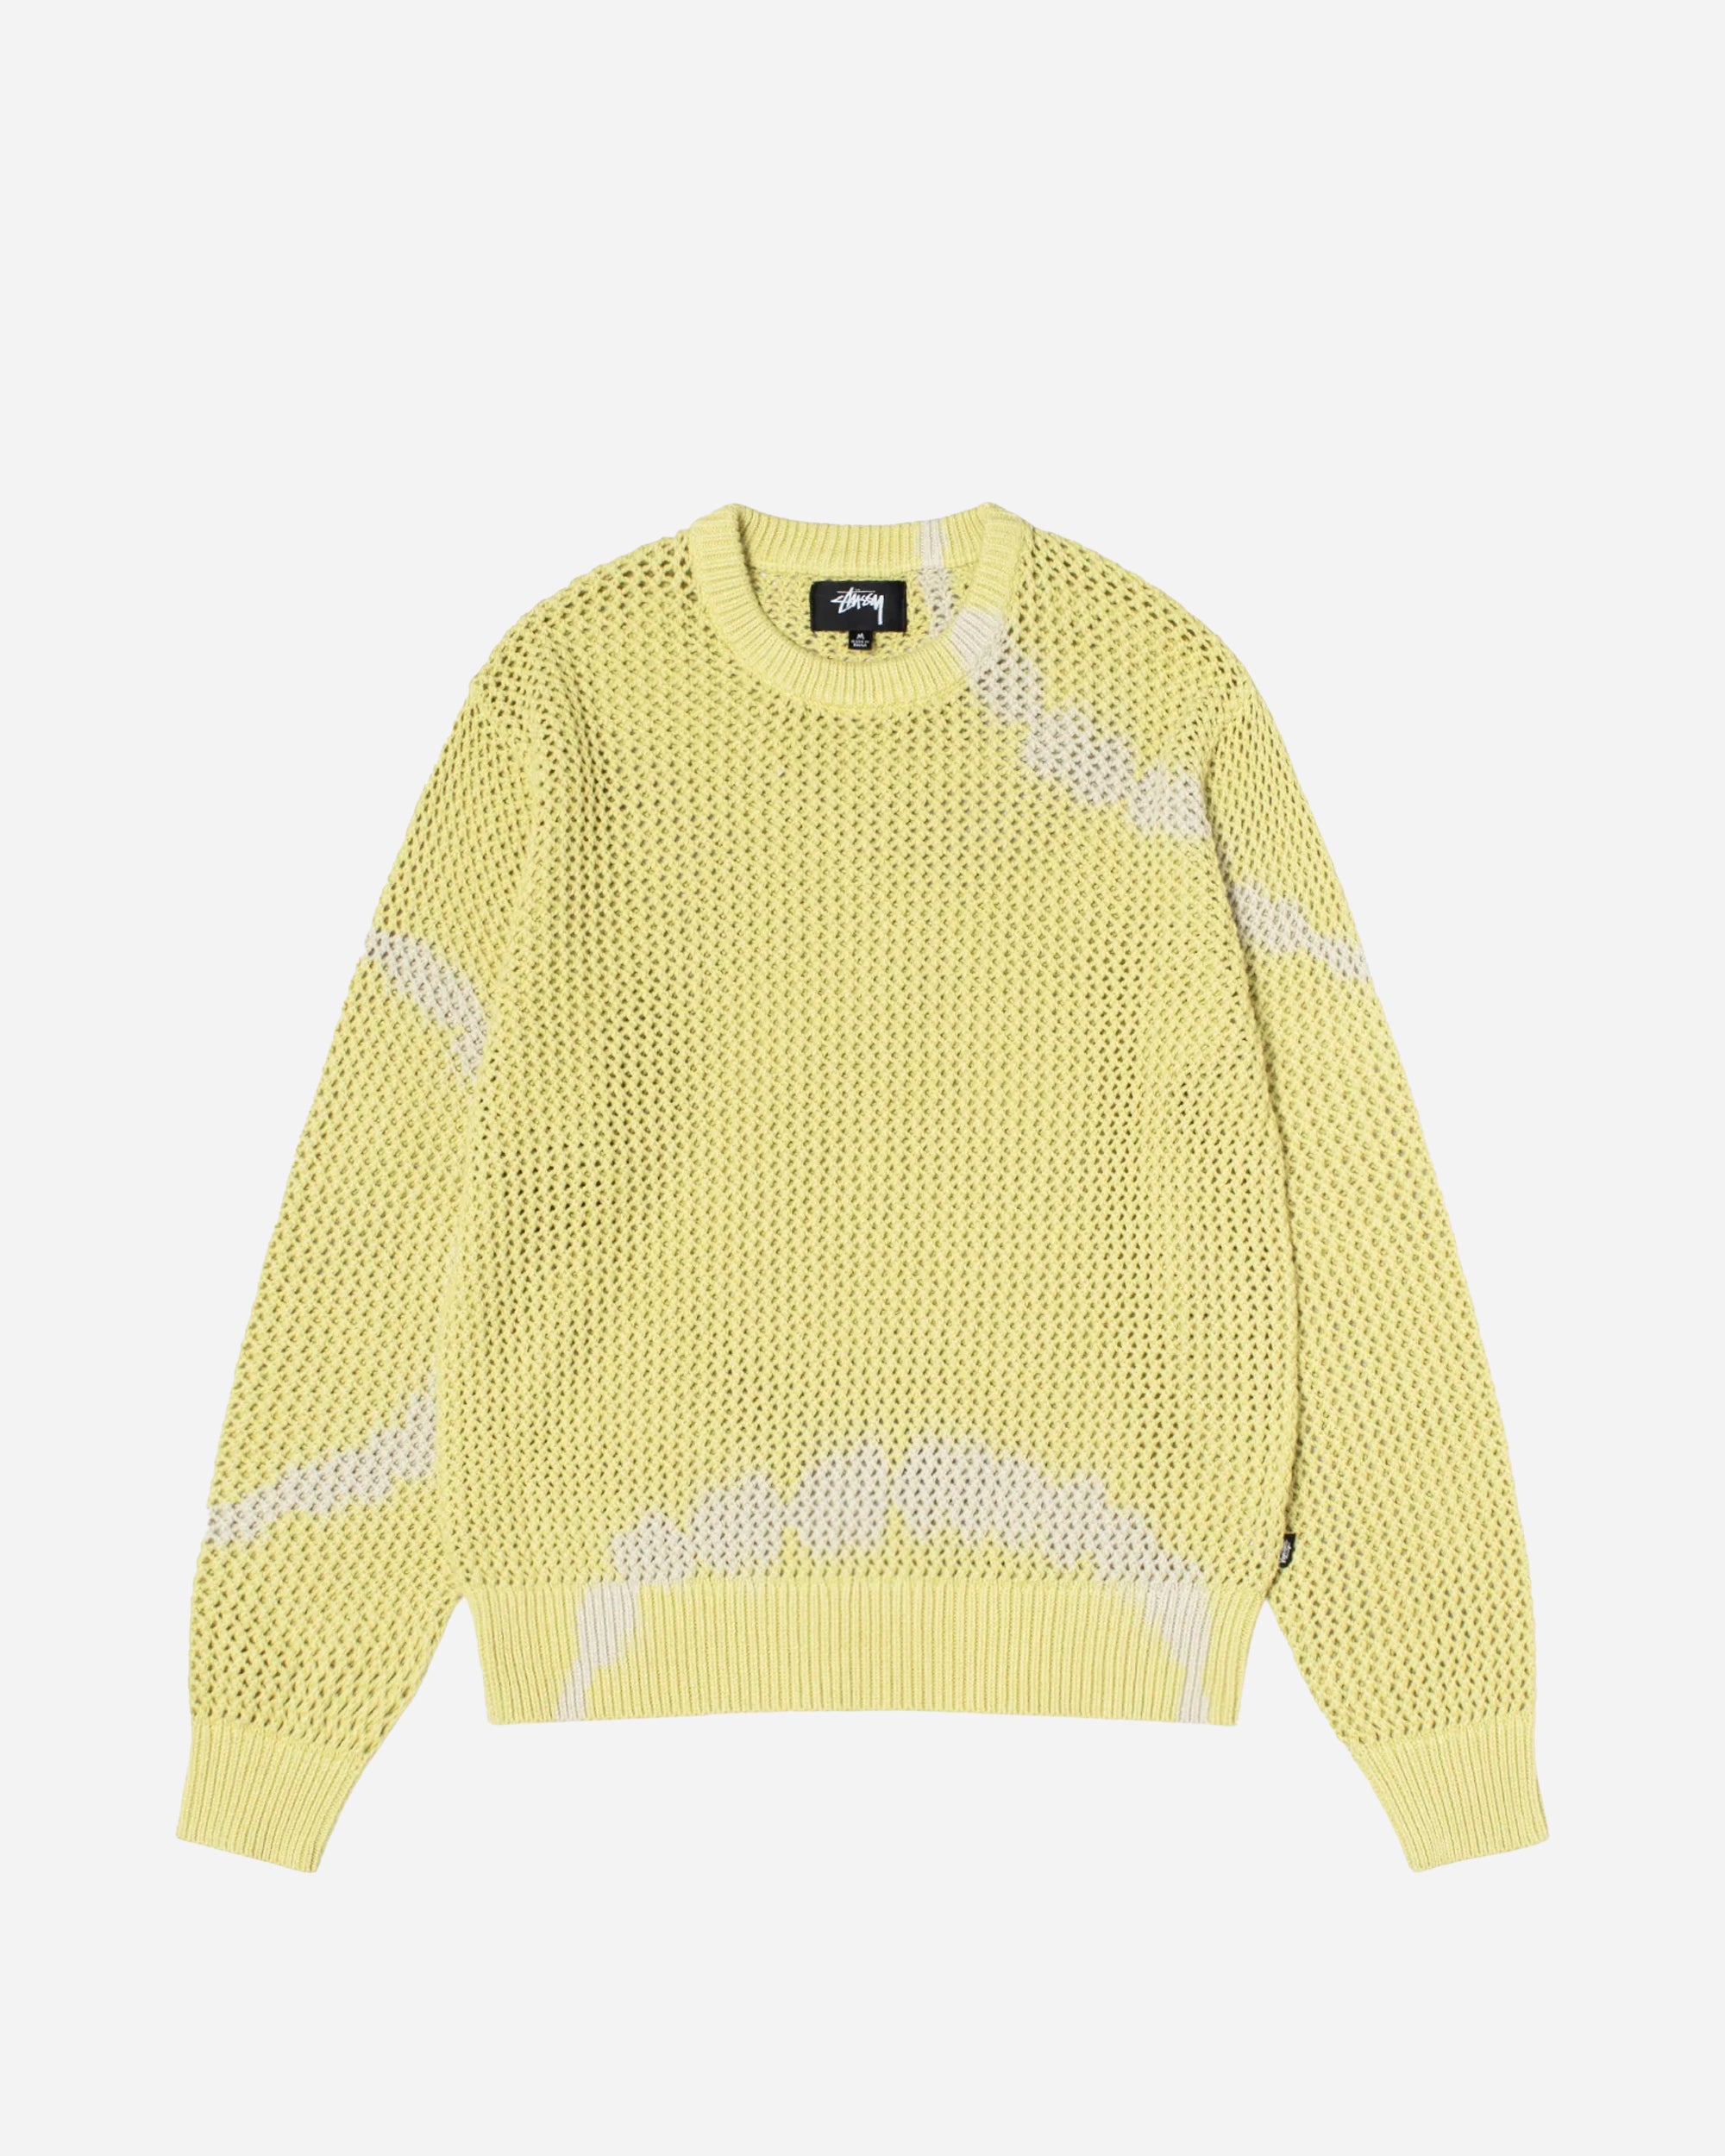 STUSSY Pigment Dyed Loose Gauge Sweater tie dye yellow 117105-1276